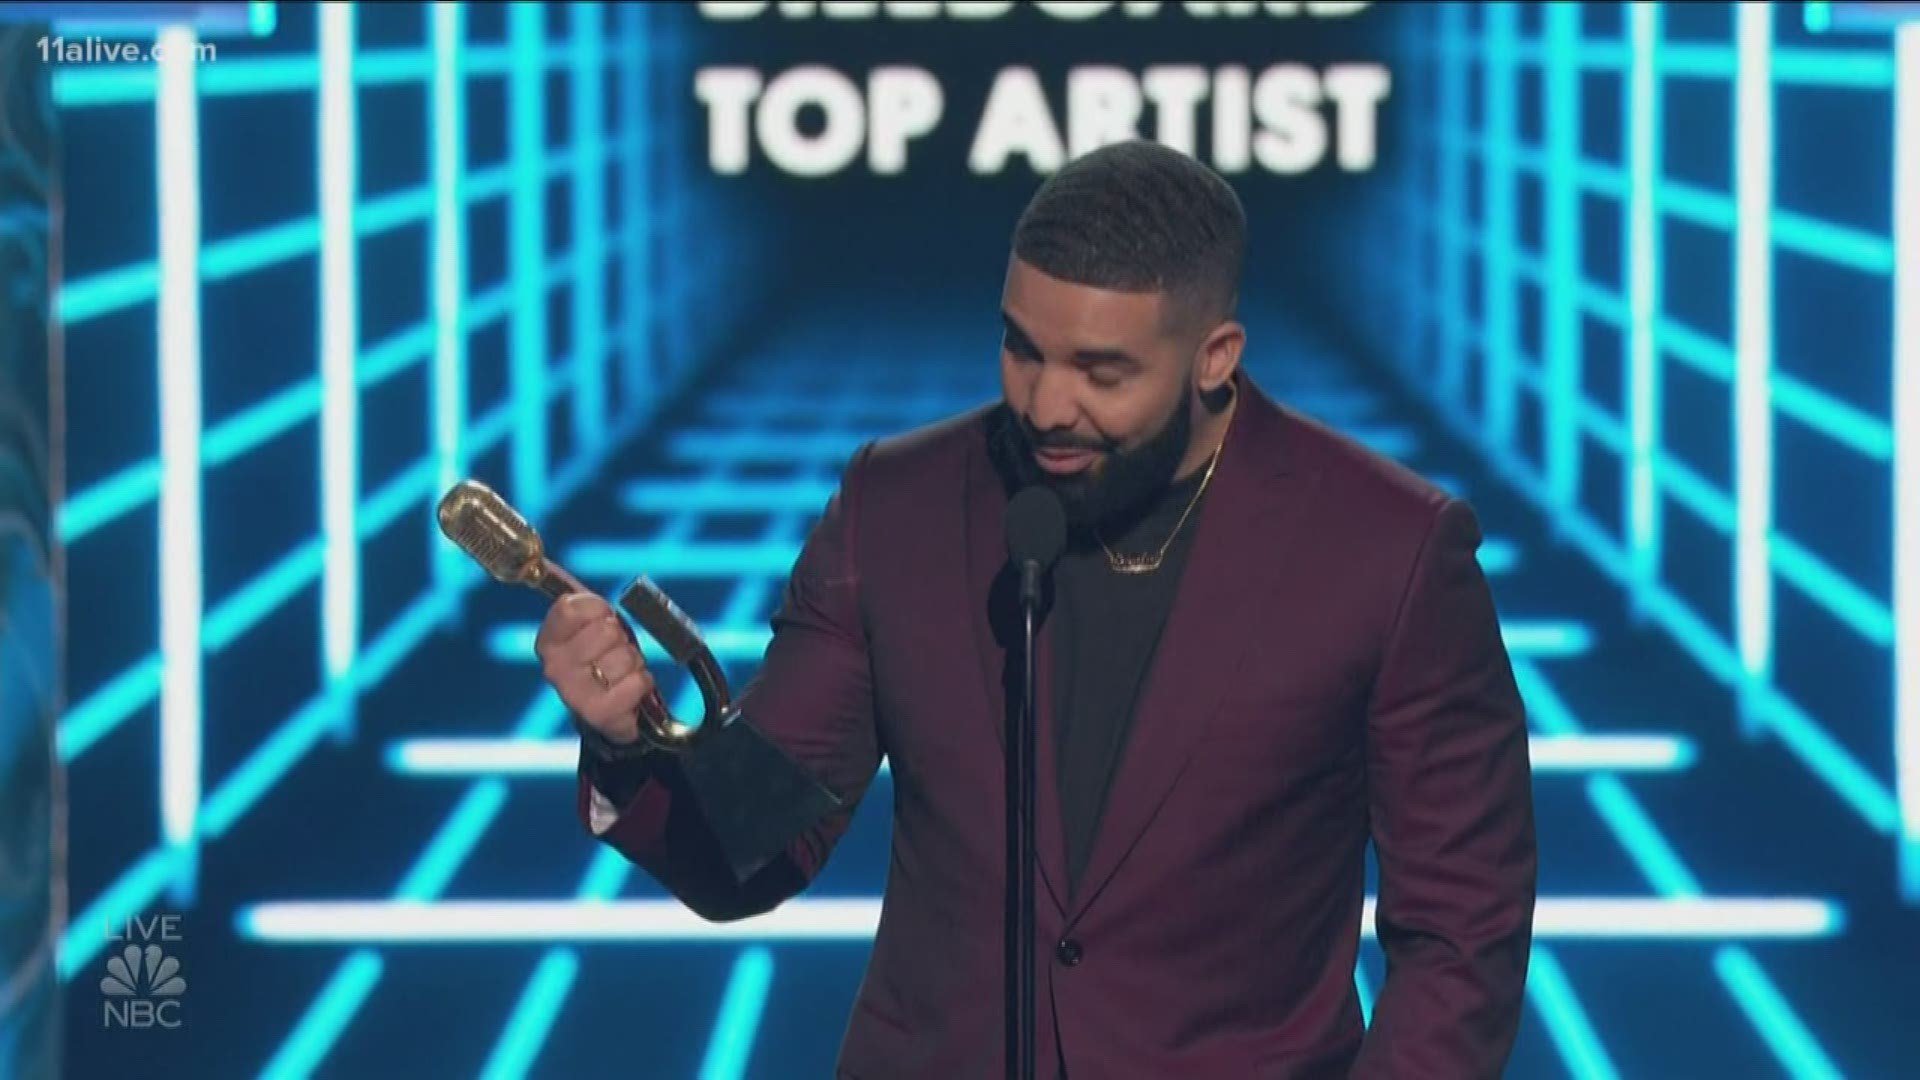 Drake took home 12 awards, Cardi B scored 6 wins and Mariah Carey was honored with the Icon Award.